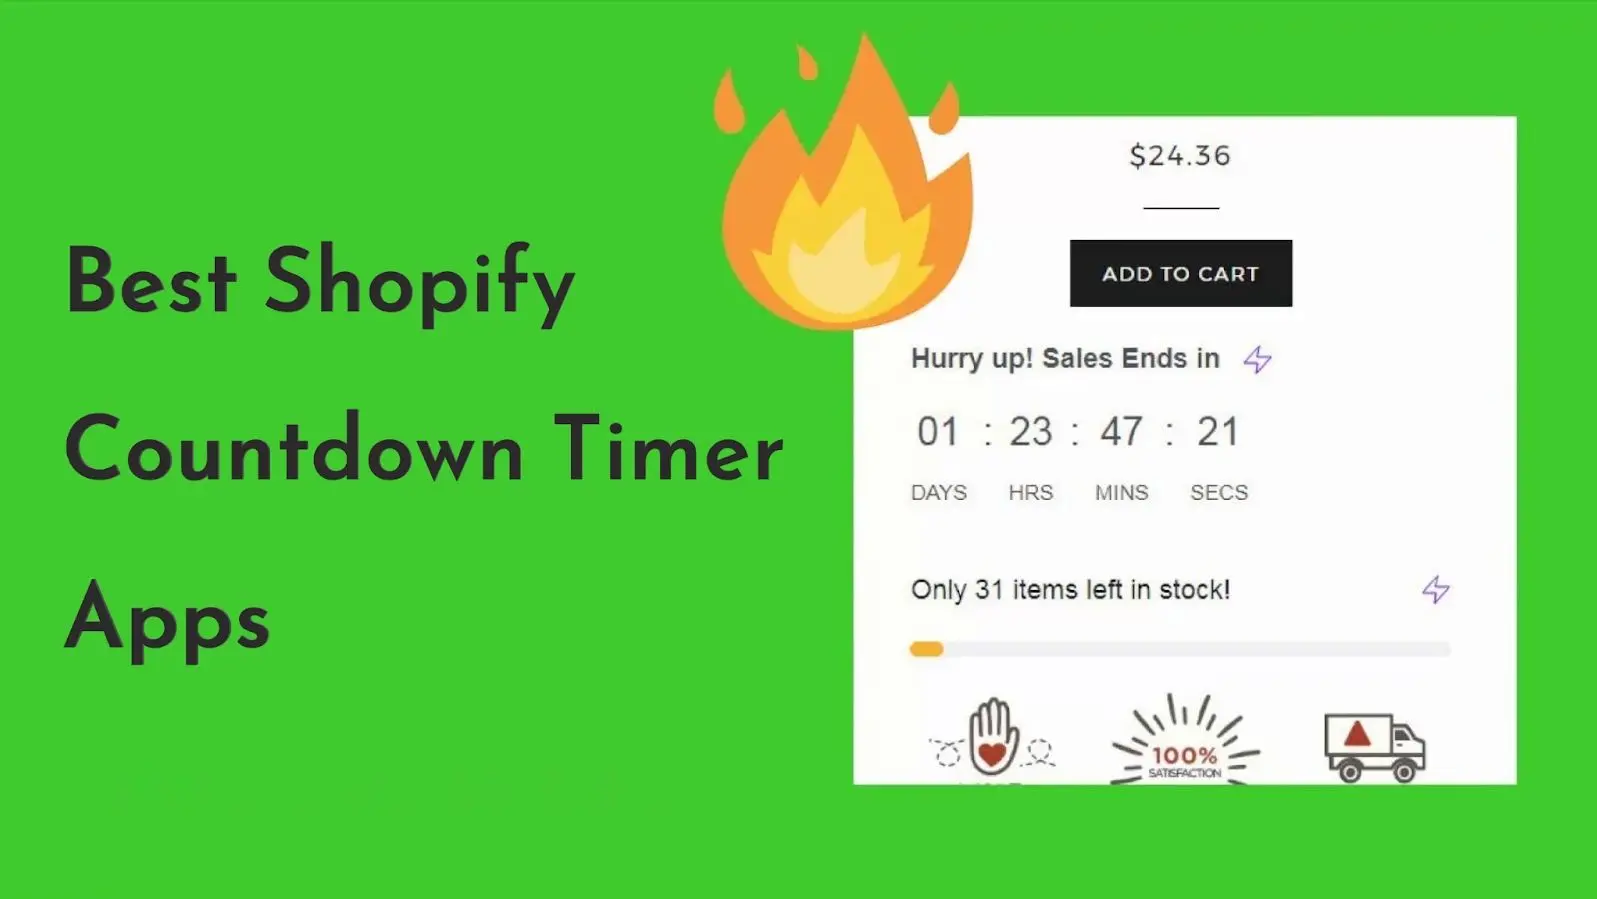 Add a Scarcity Cart Countdown Timer to your Shopify Store